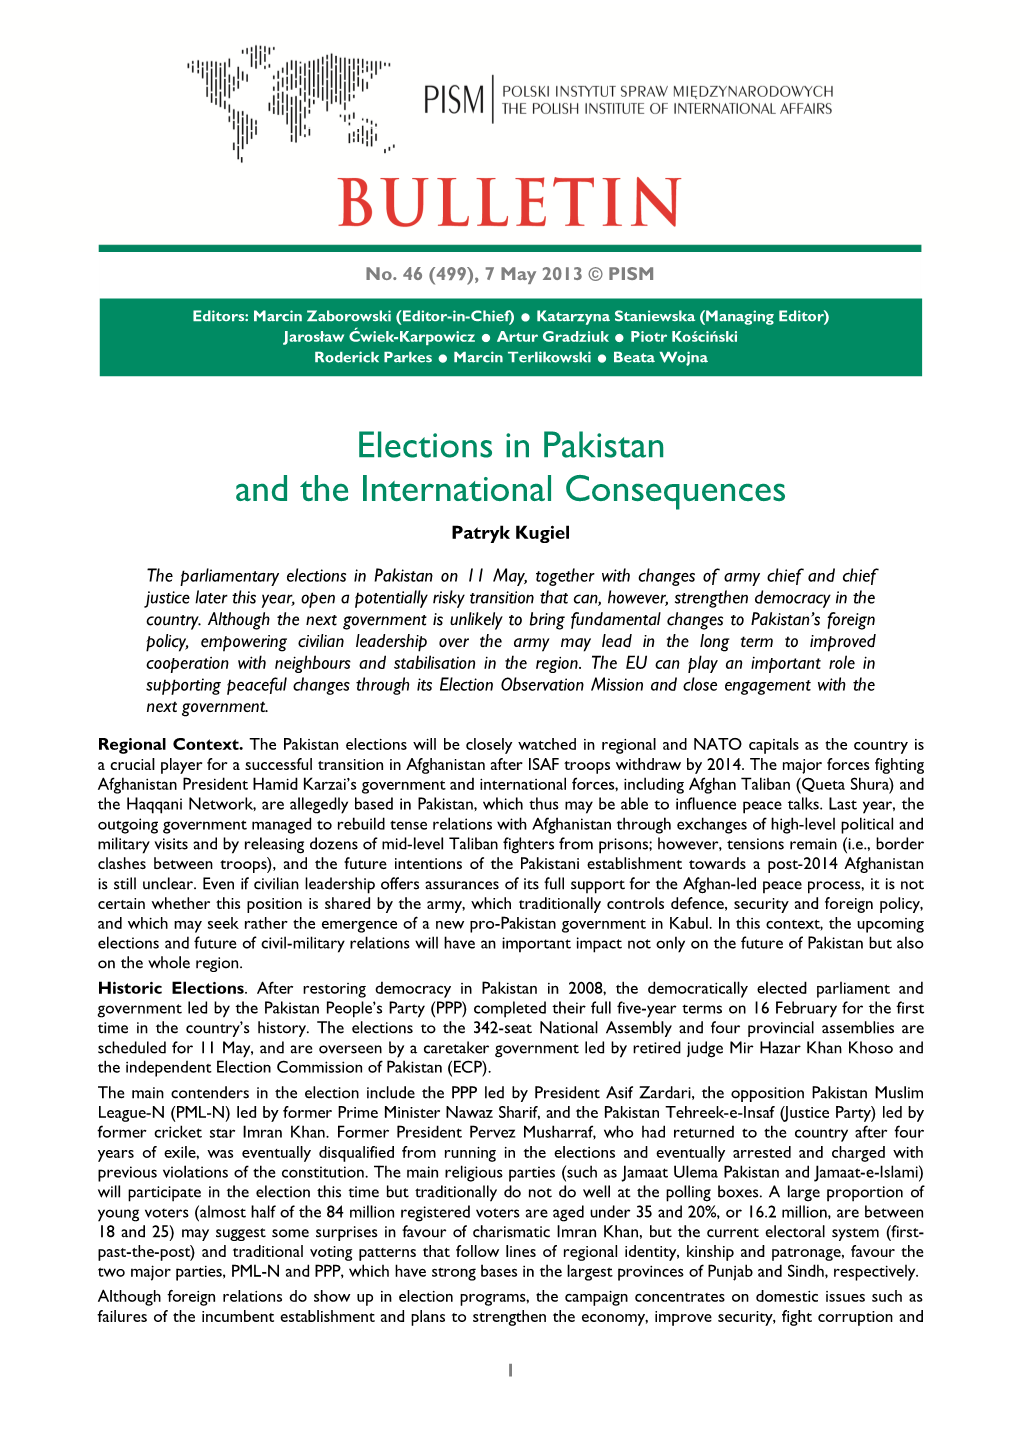 Elections in Pakistan and the International Consequences Patryk Kugiel